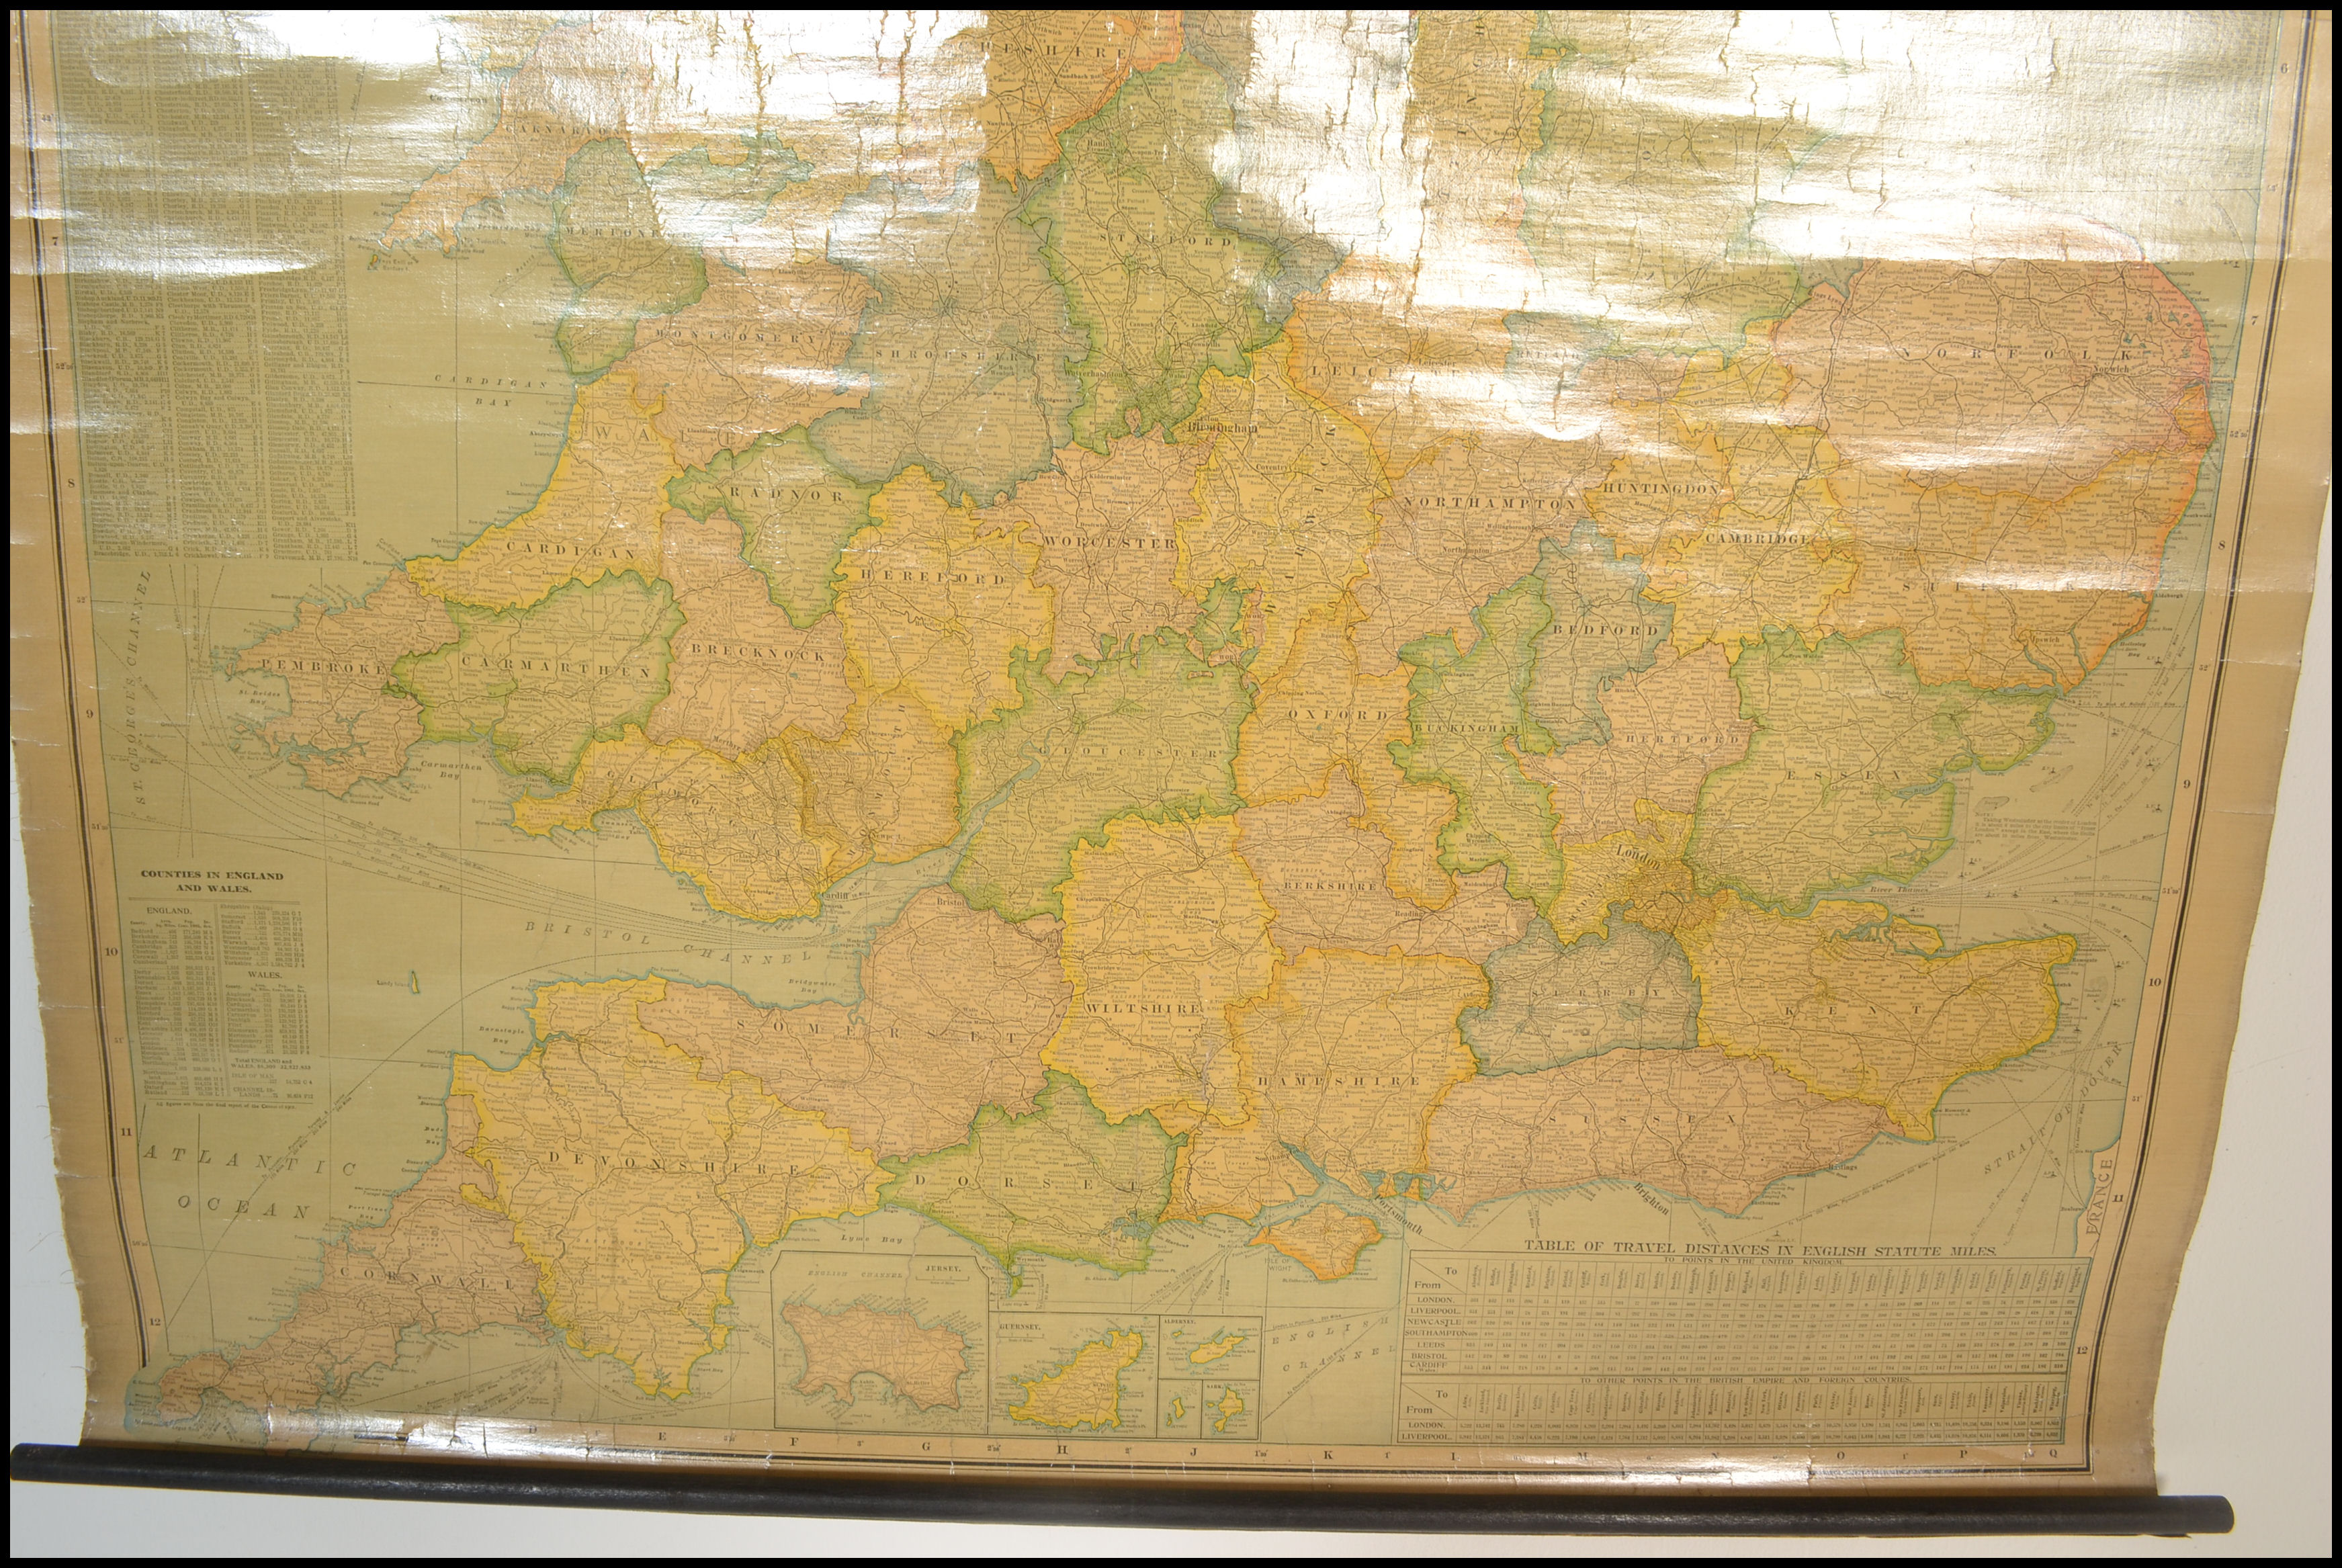 A Vintage Scarborough map of England and wales showing Geographical Counties and Boroughs, all - Image 4 of 8